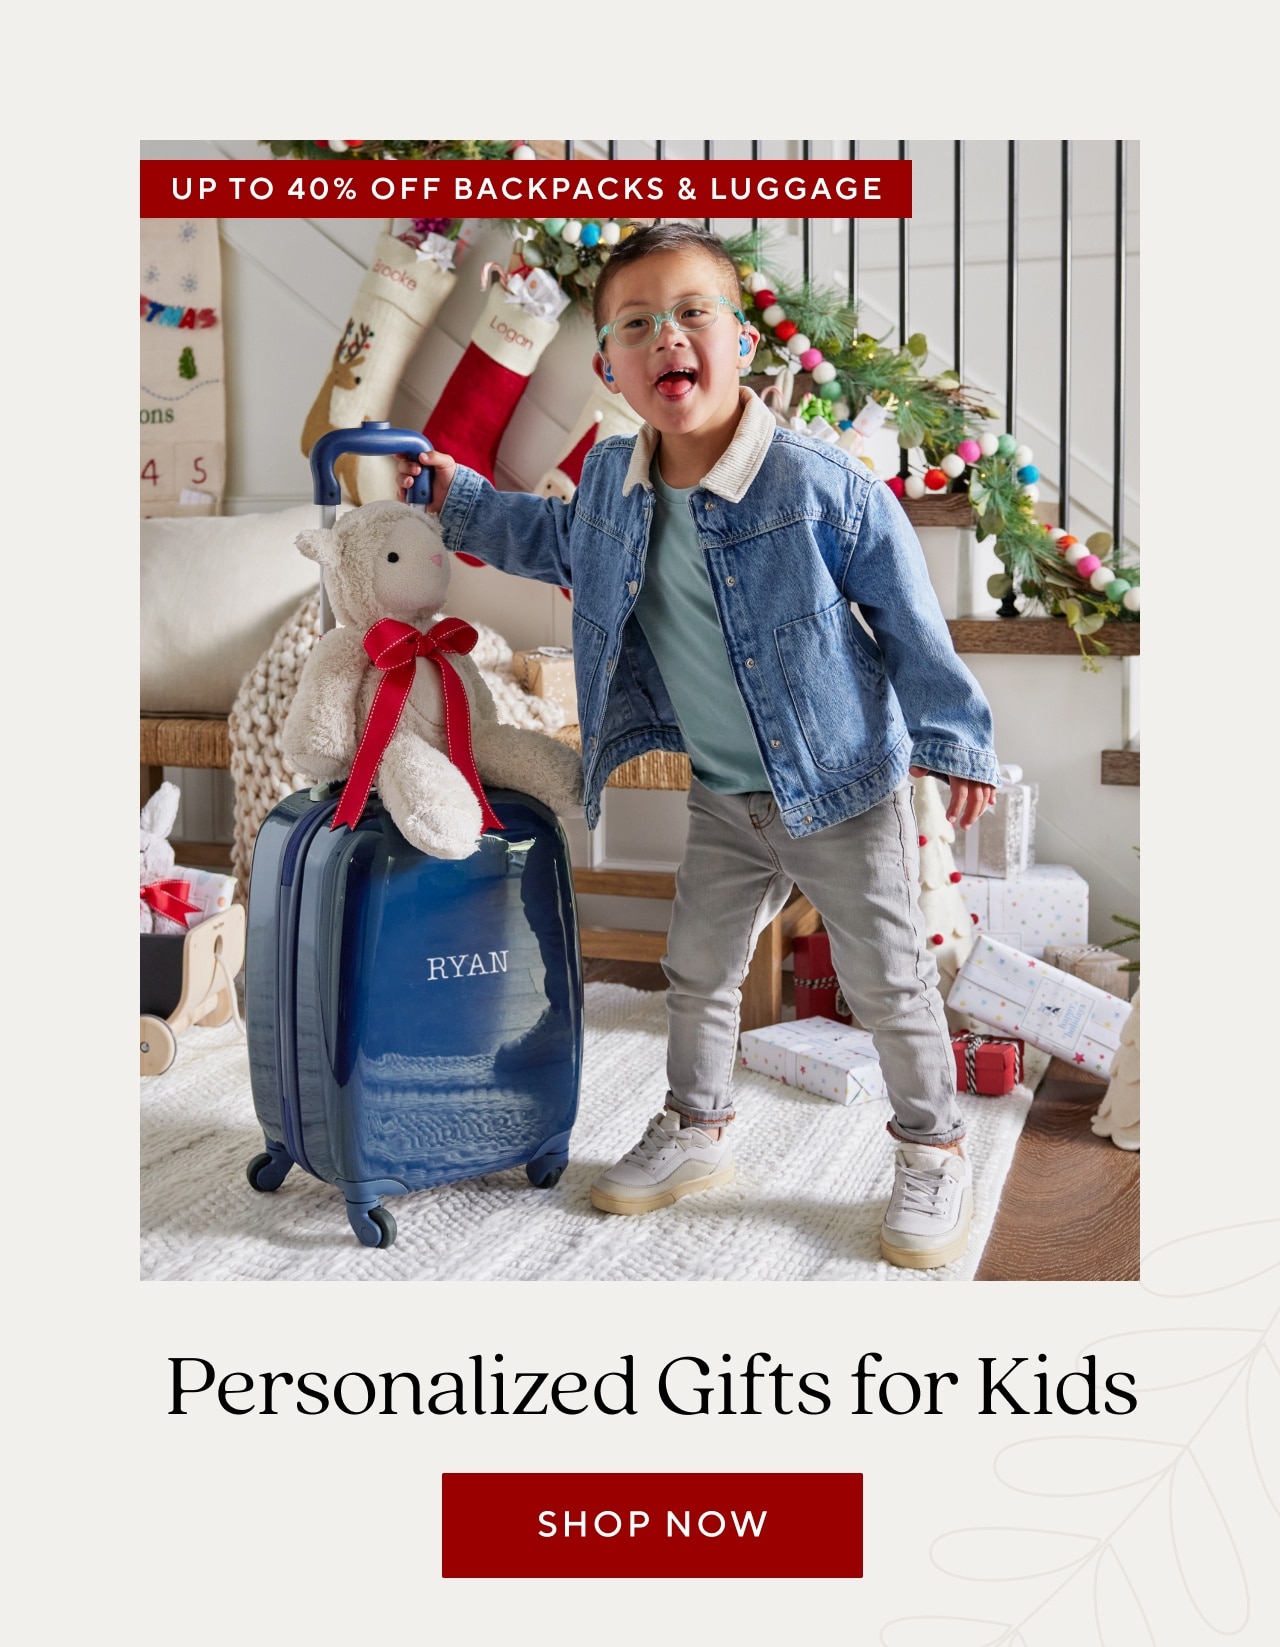 PERSONALIZED GIFTS FOR KIDS